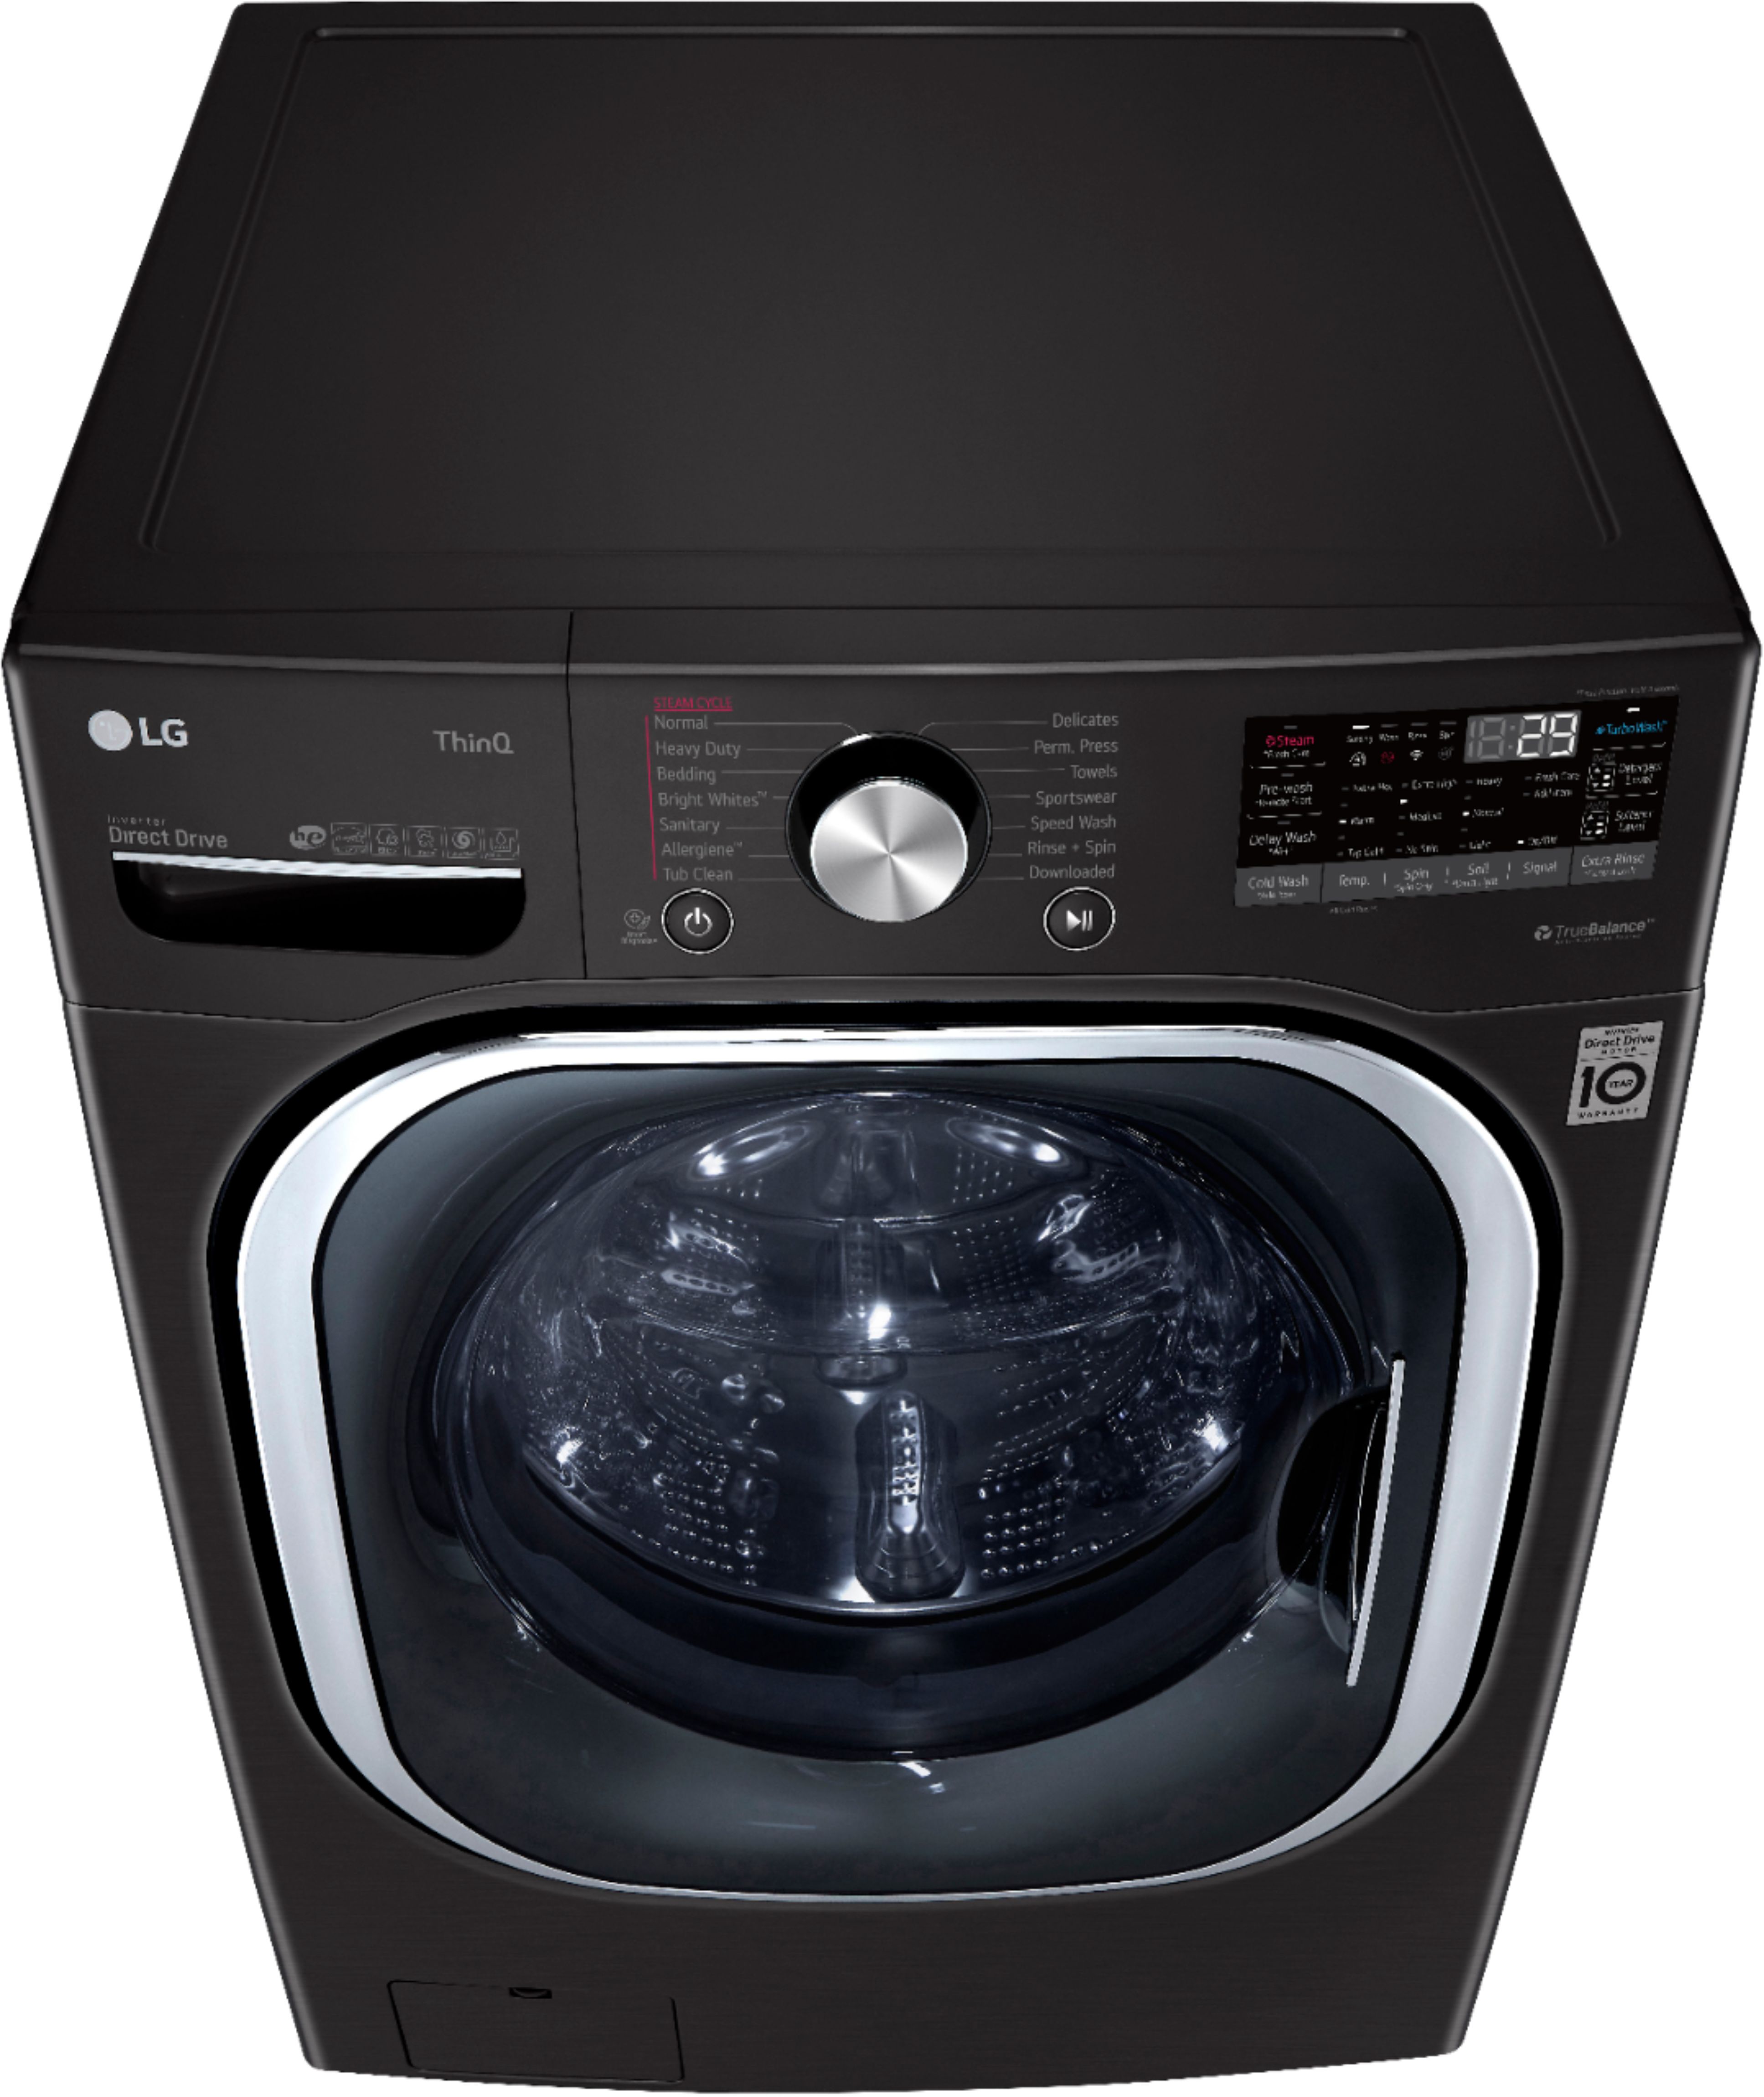 LG 5.0 cu. ft. Front Load Washer with TurboWash 360 and 7.4 cu. ft.  ELECTRIC Dryer with TurboSteam and Built-In Intelligence